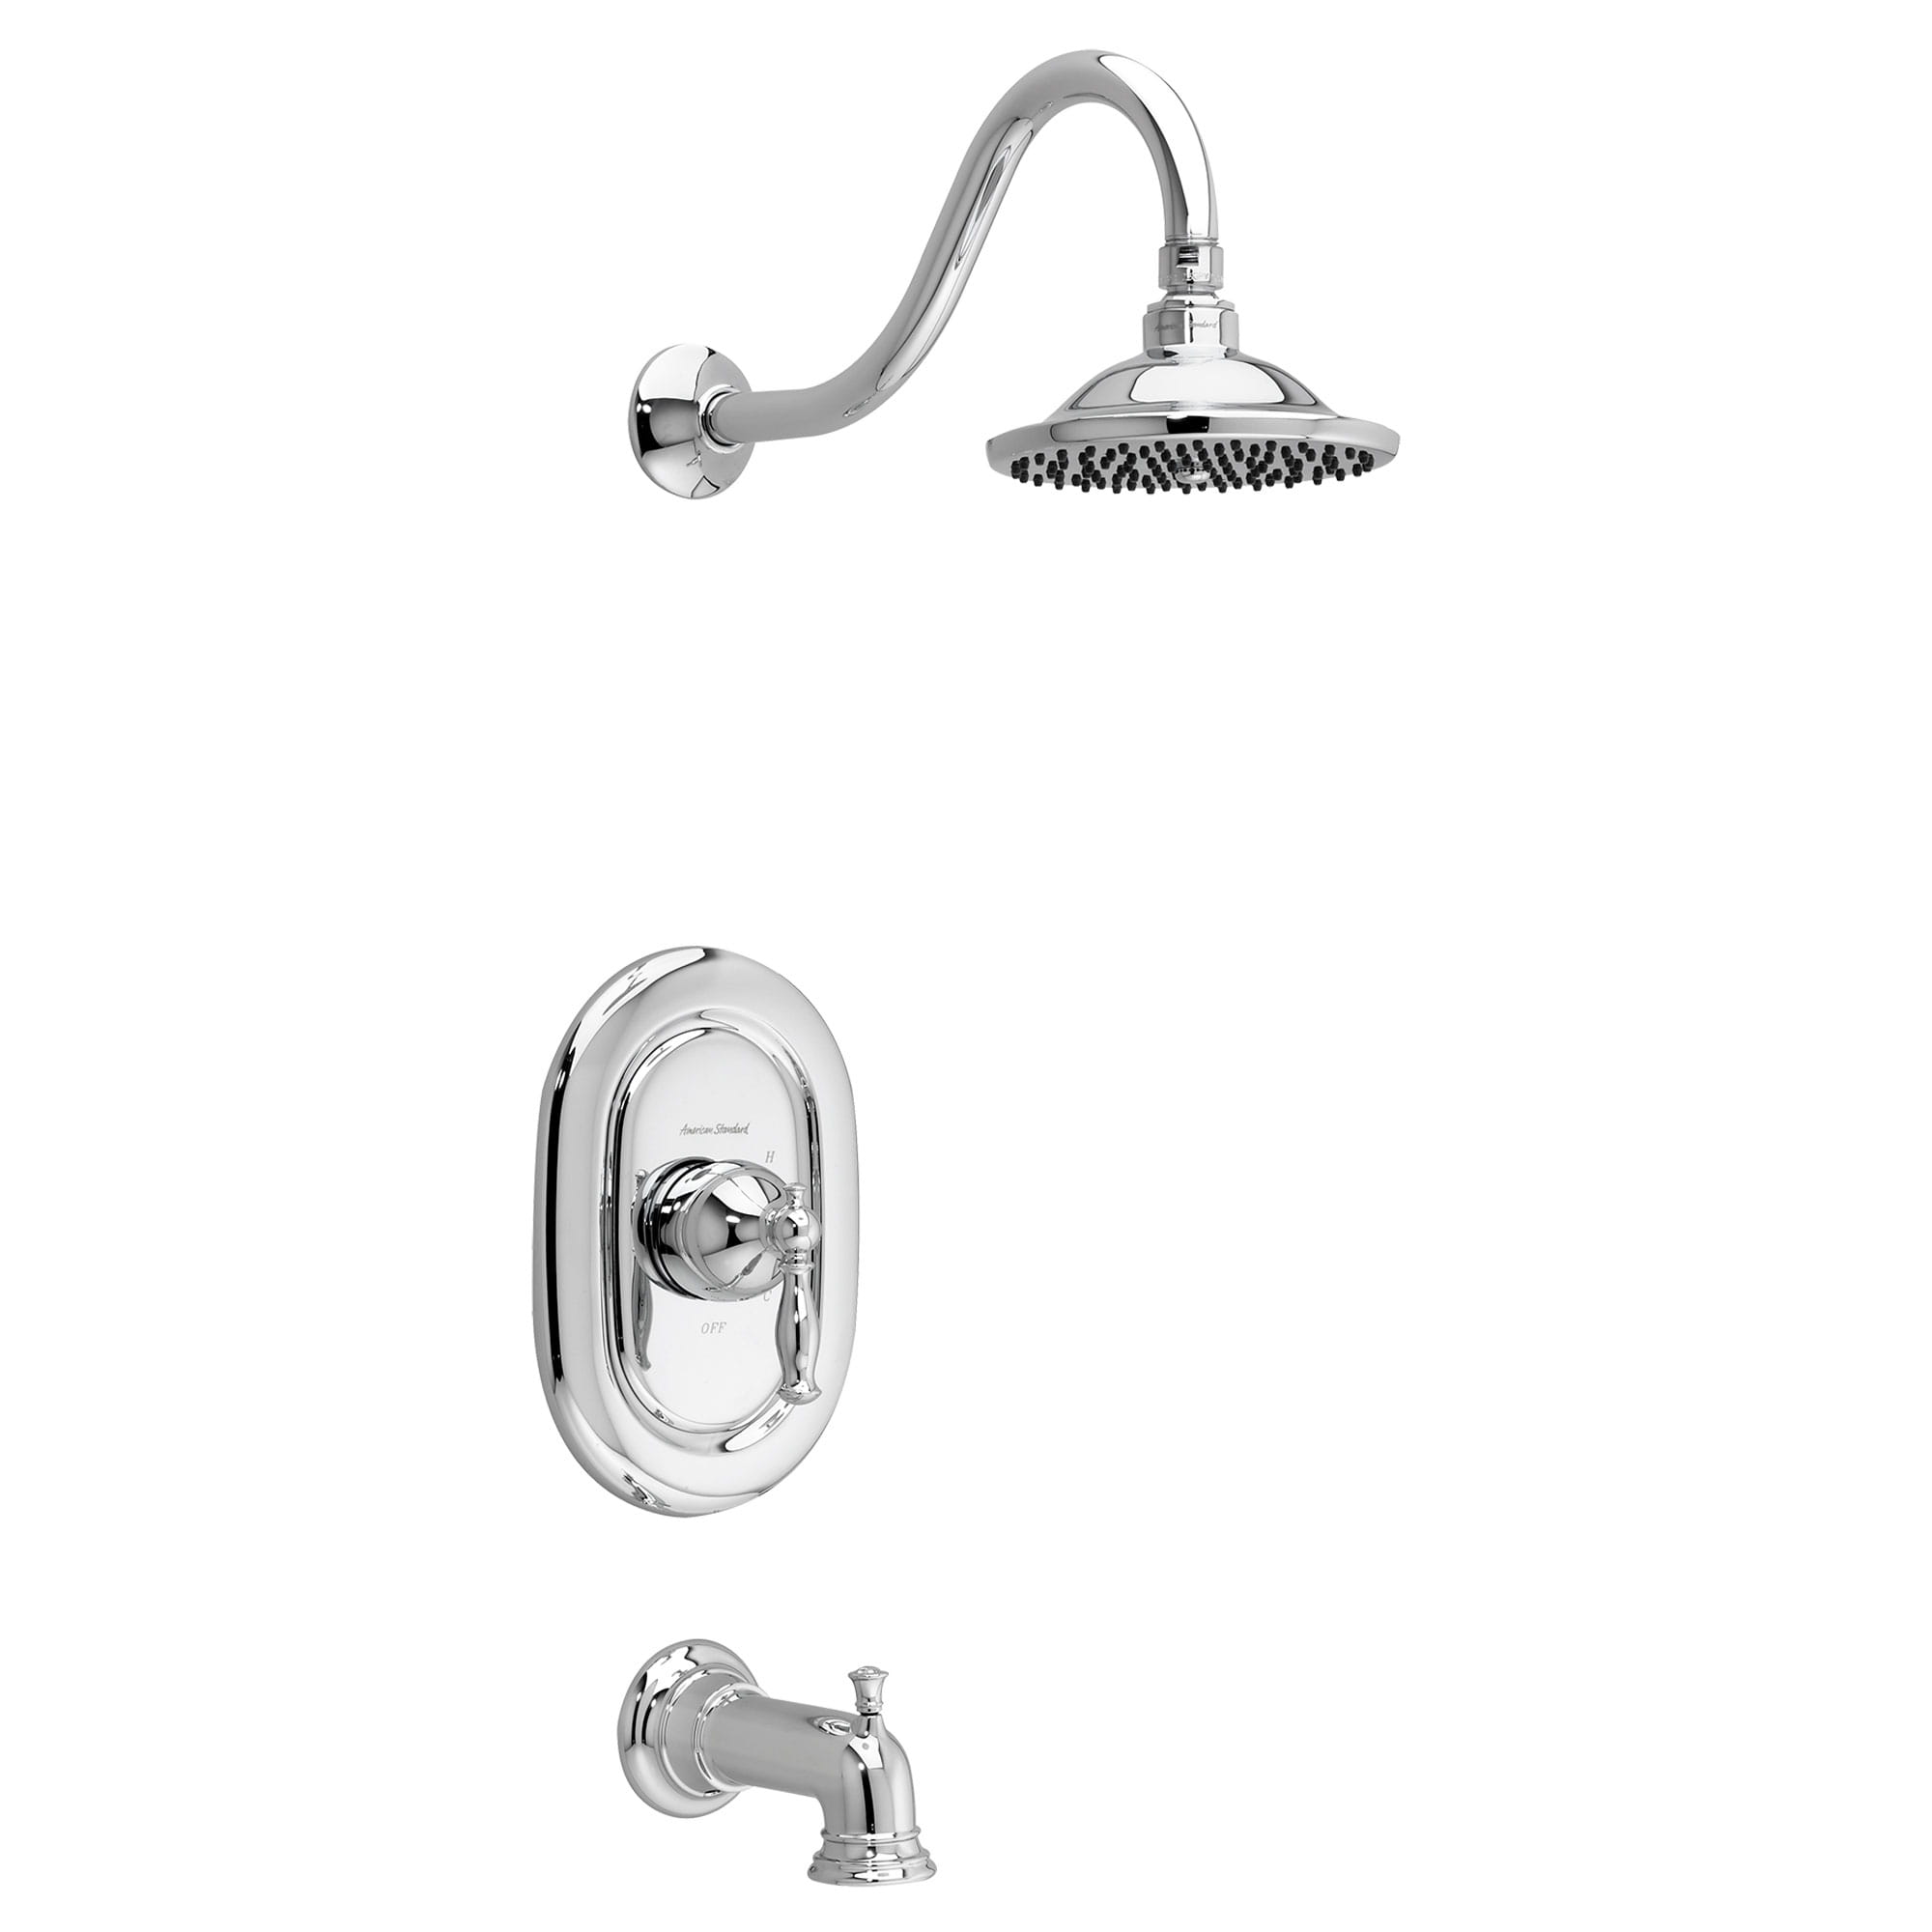 Quentin 25 GPM Tub and Shower Trim Kit with Rain Showerhead and Lever Handle CHROME